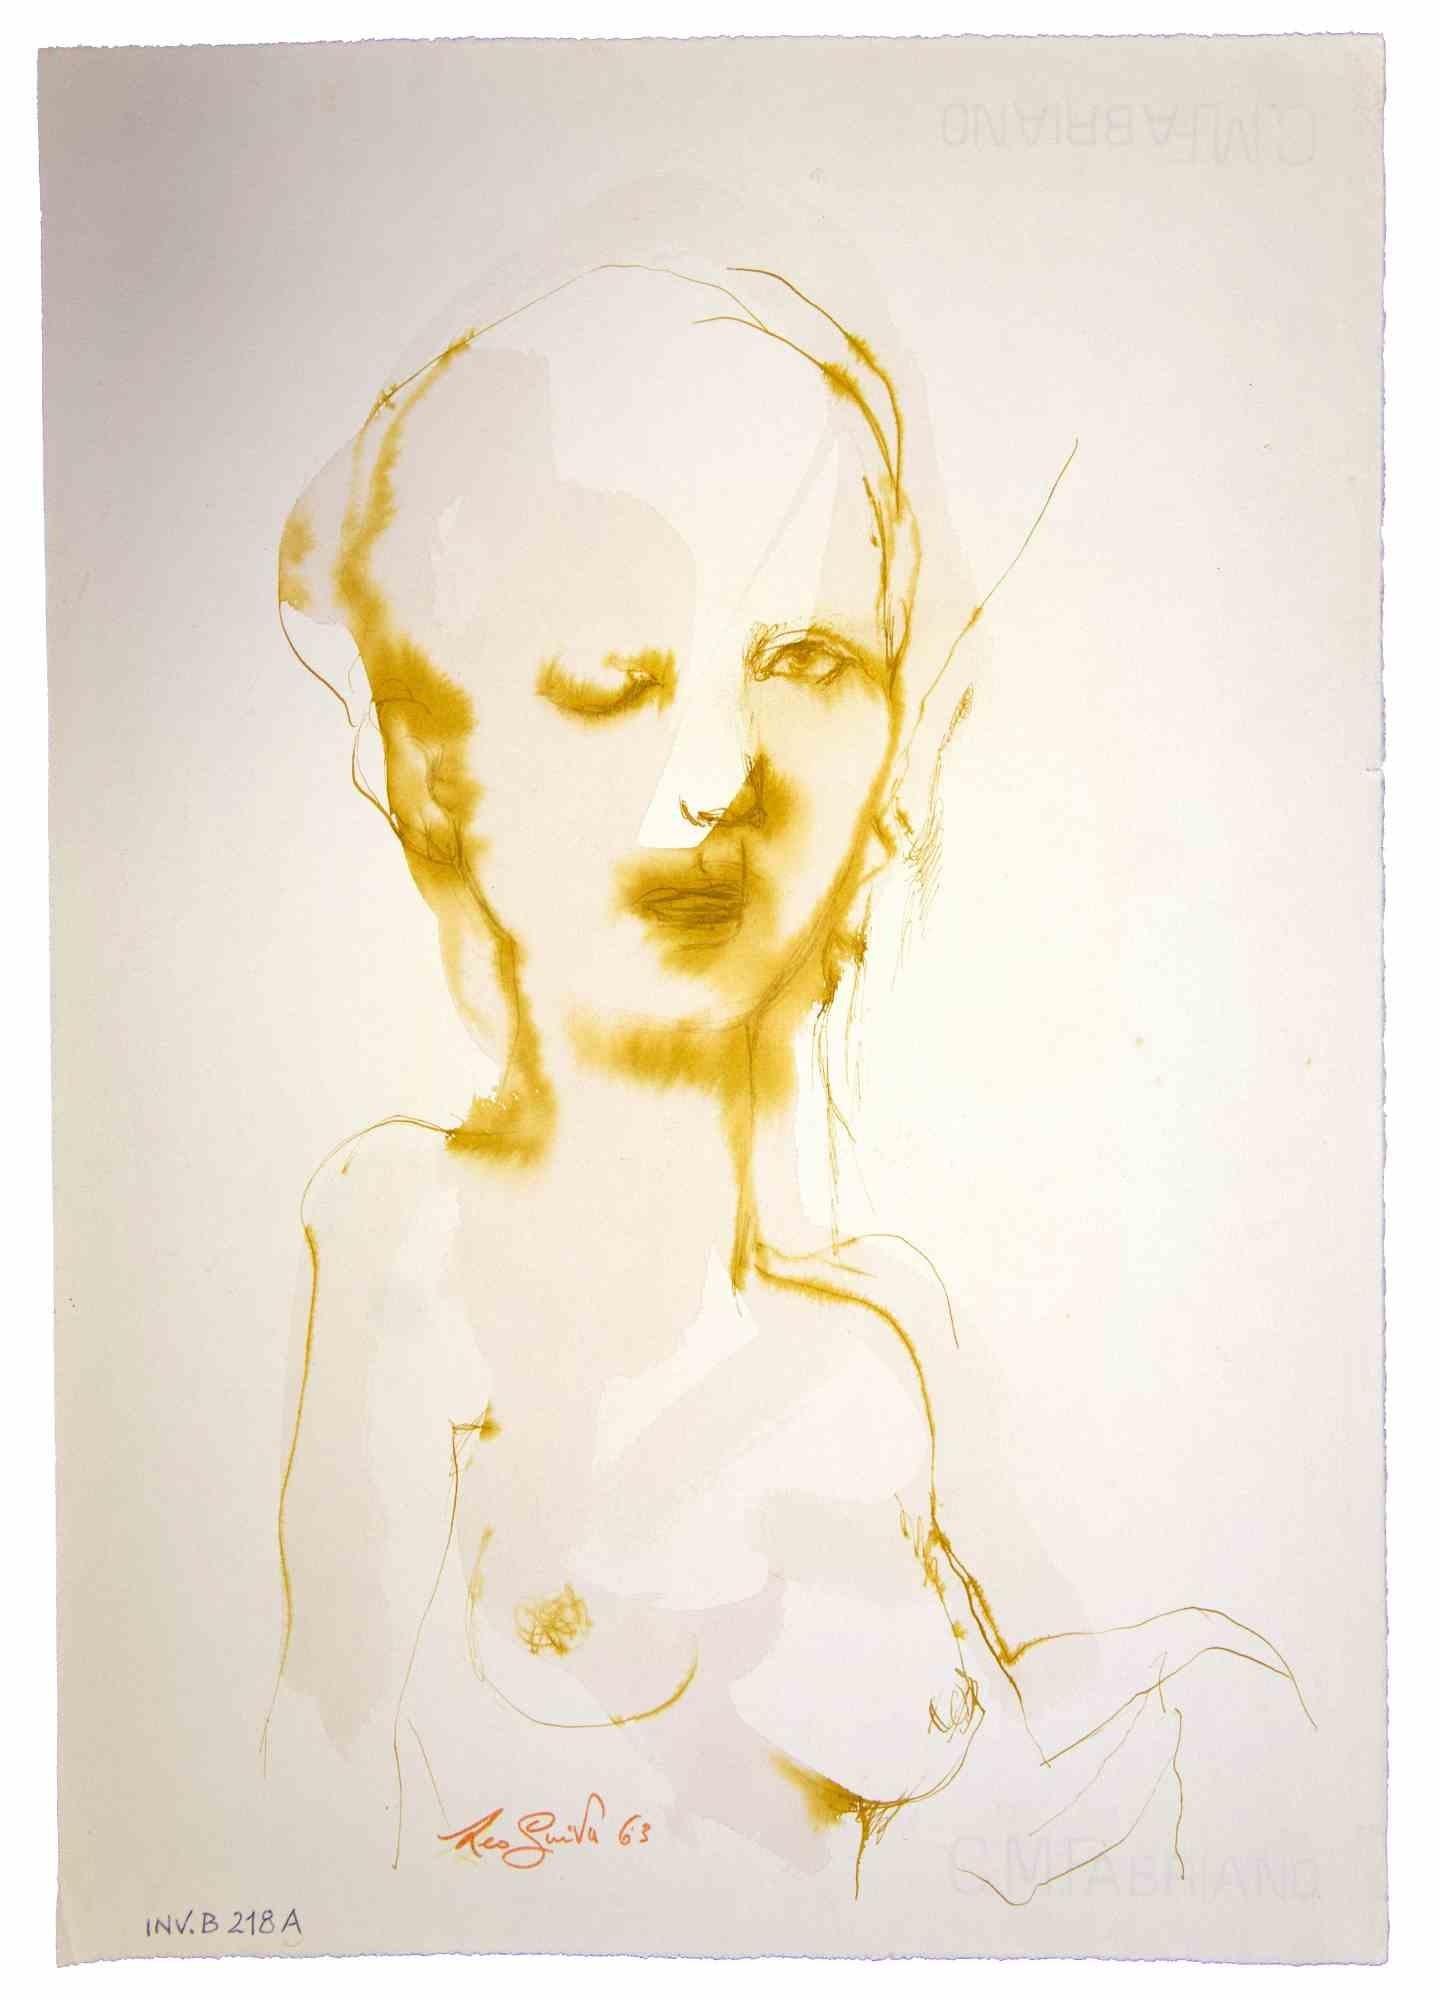 Portrait is an original Contemporary artwork realized  in 1963  by the italian Contemporary artist  Leo Guida  (1992 - 2017).

Original ink and watercolor drawing on ivory-colored paper.
 
Hand-signed and dated on the lower margin. Cat. INV.B 218